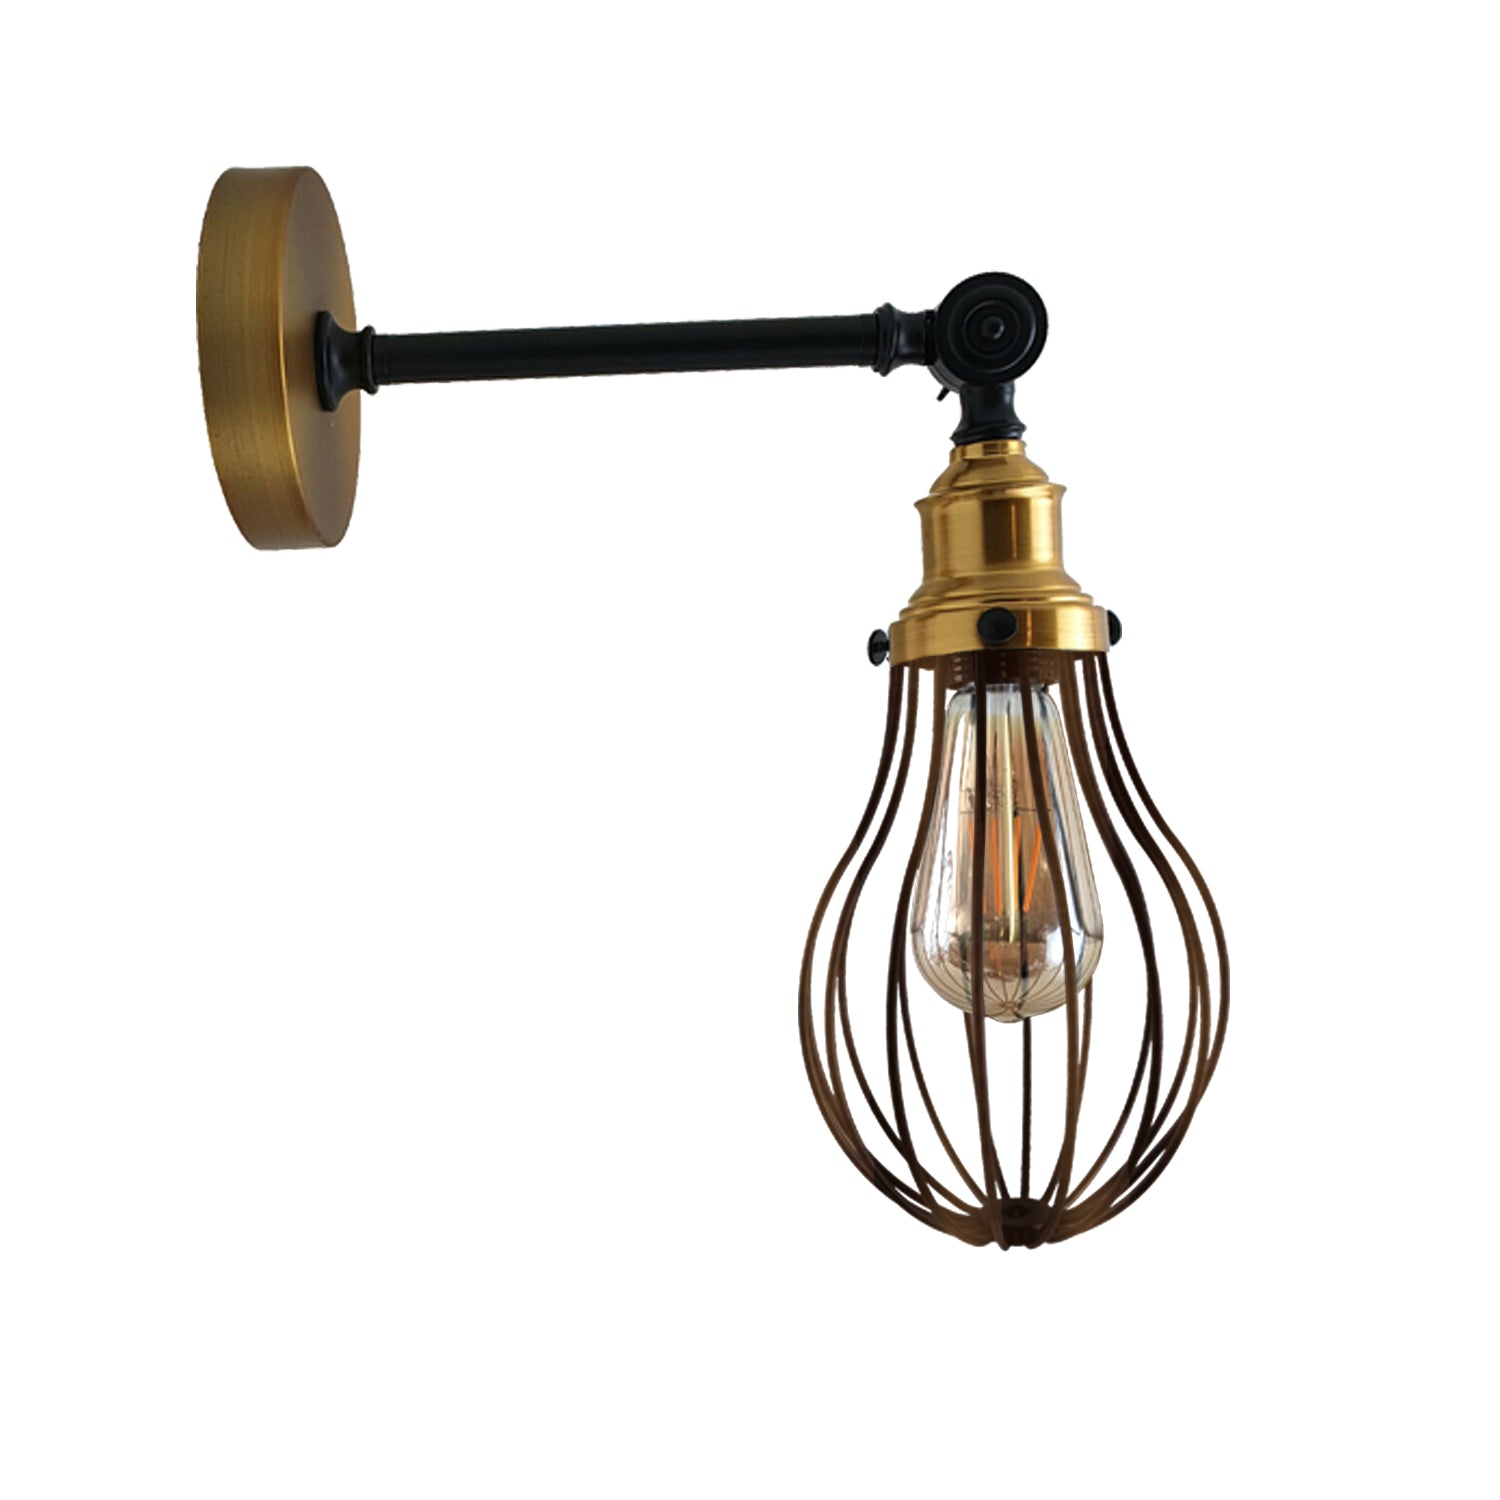 Vintage Industrial Retro Brushed Copper Metal indoor Wall Lamp Light Cage